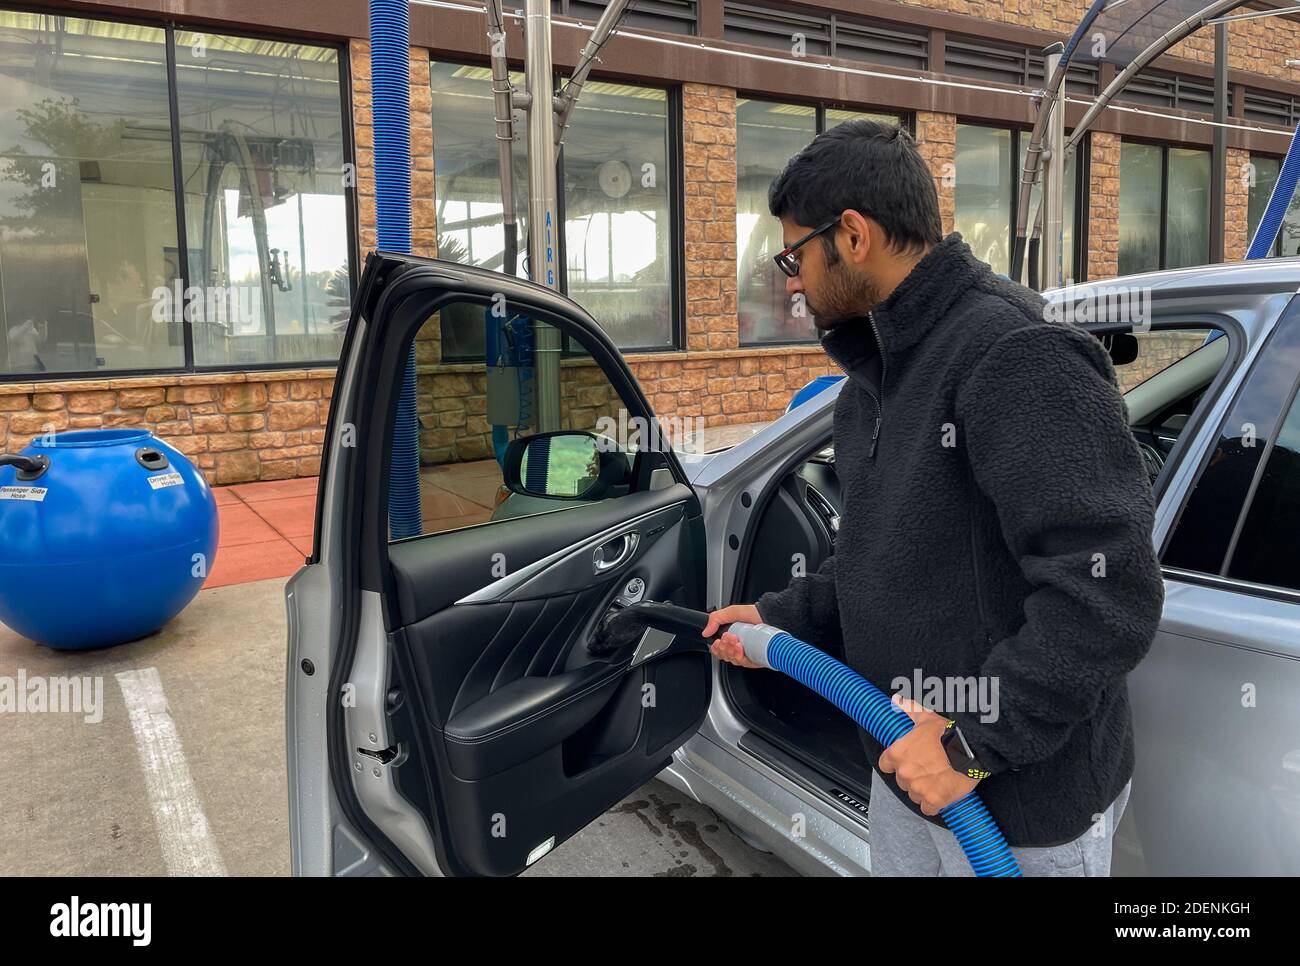 Mckinney, TX / USA - November 30, 2020: Close up view of a man using the vacuum hose to vacuum his car in the self serve vacuum parking lot Stock Photo